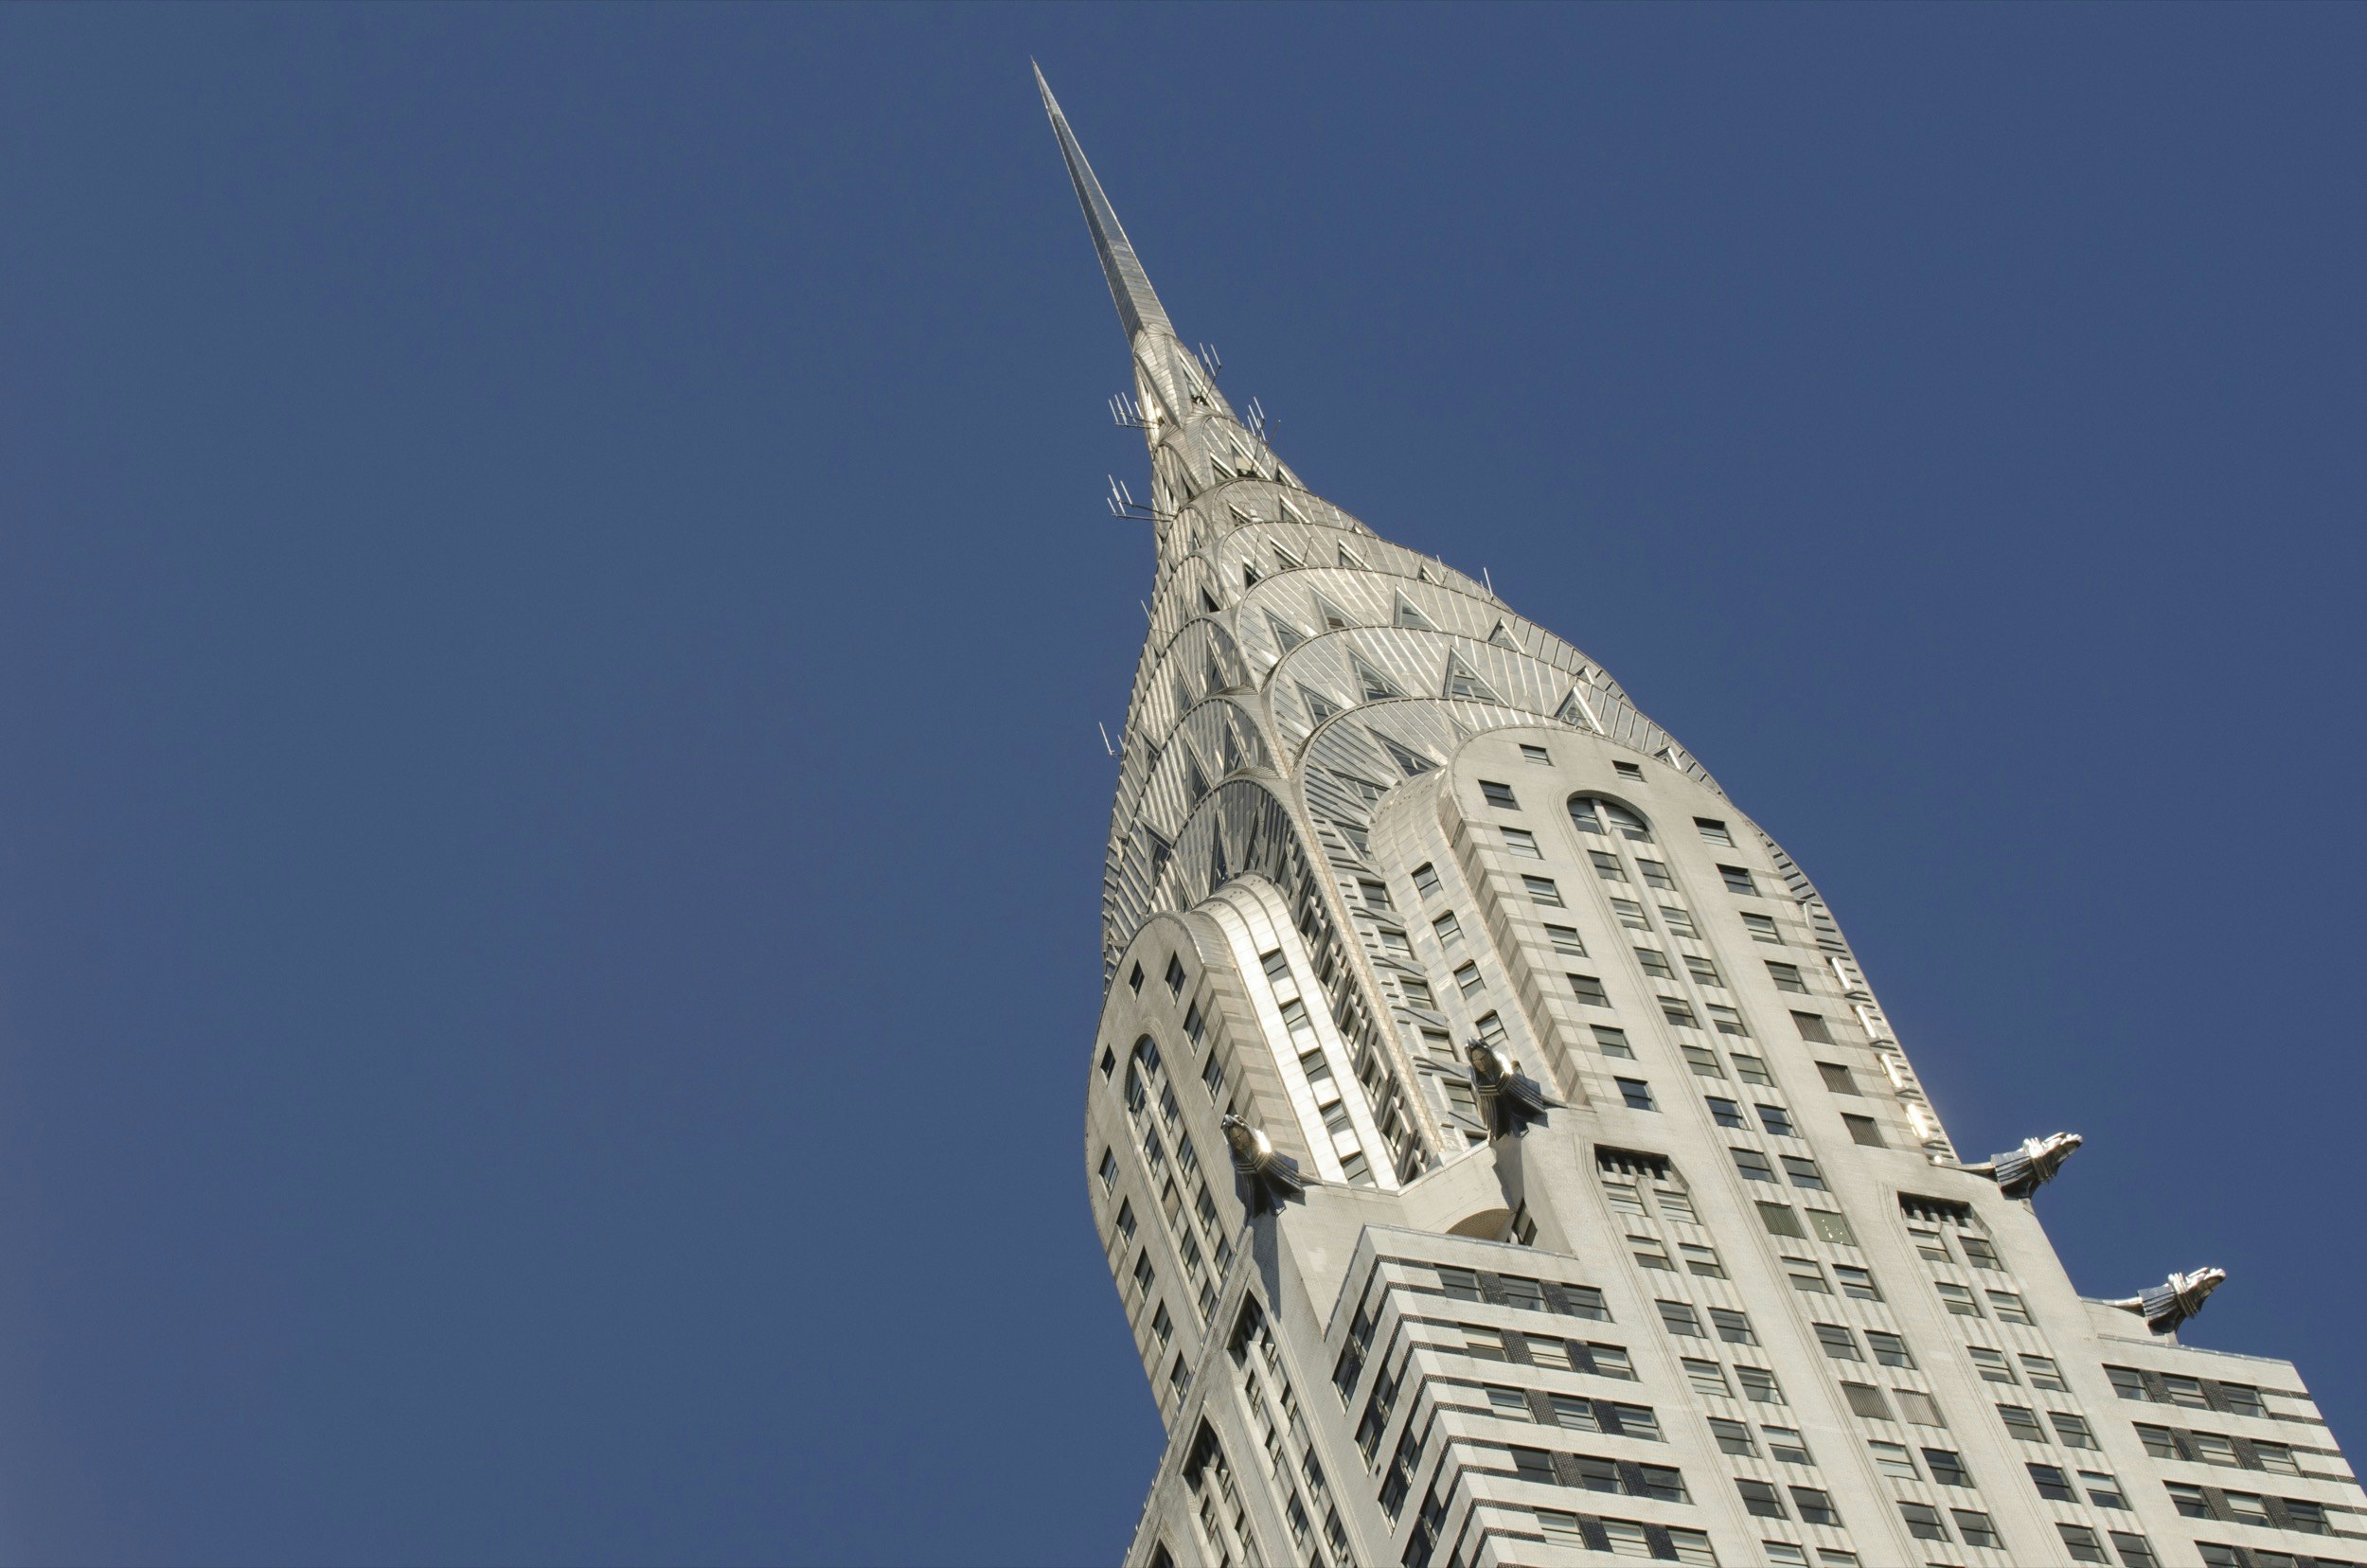 The silver-gray top of the Chrysler Building is framed at an angle against a blue sky; Best American architecture